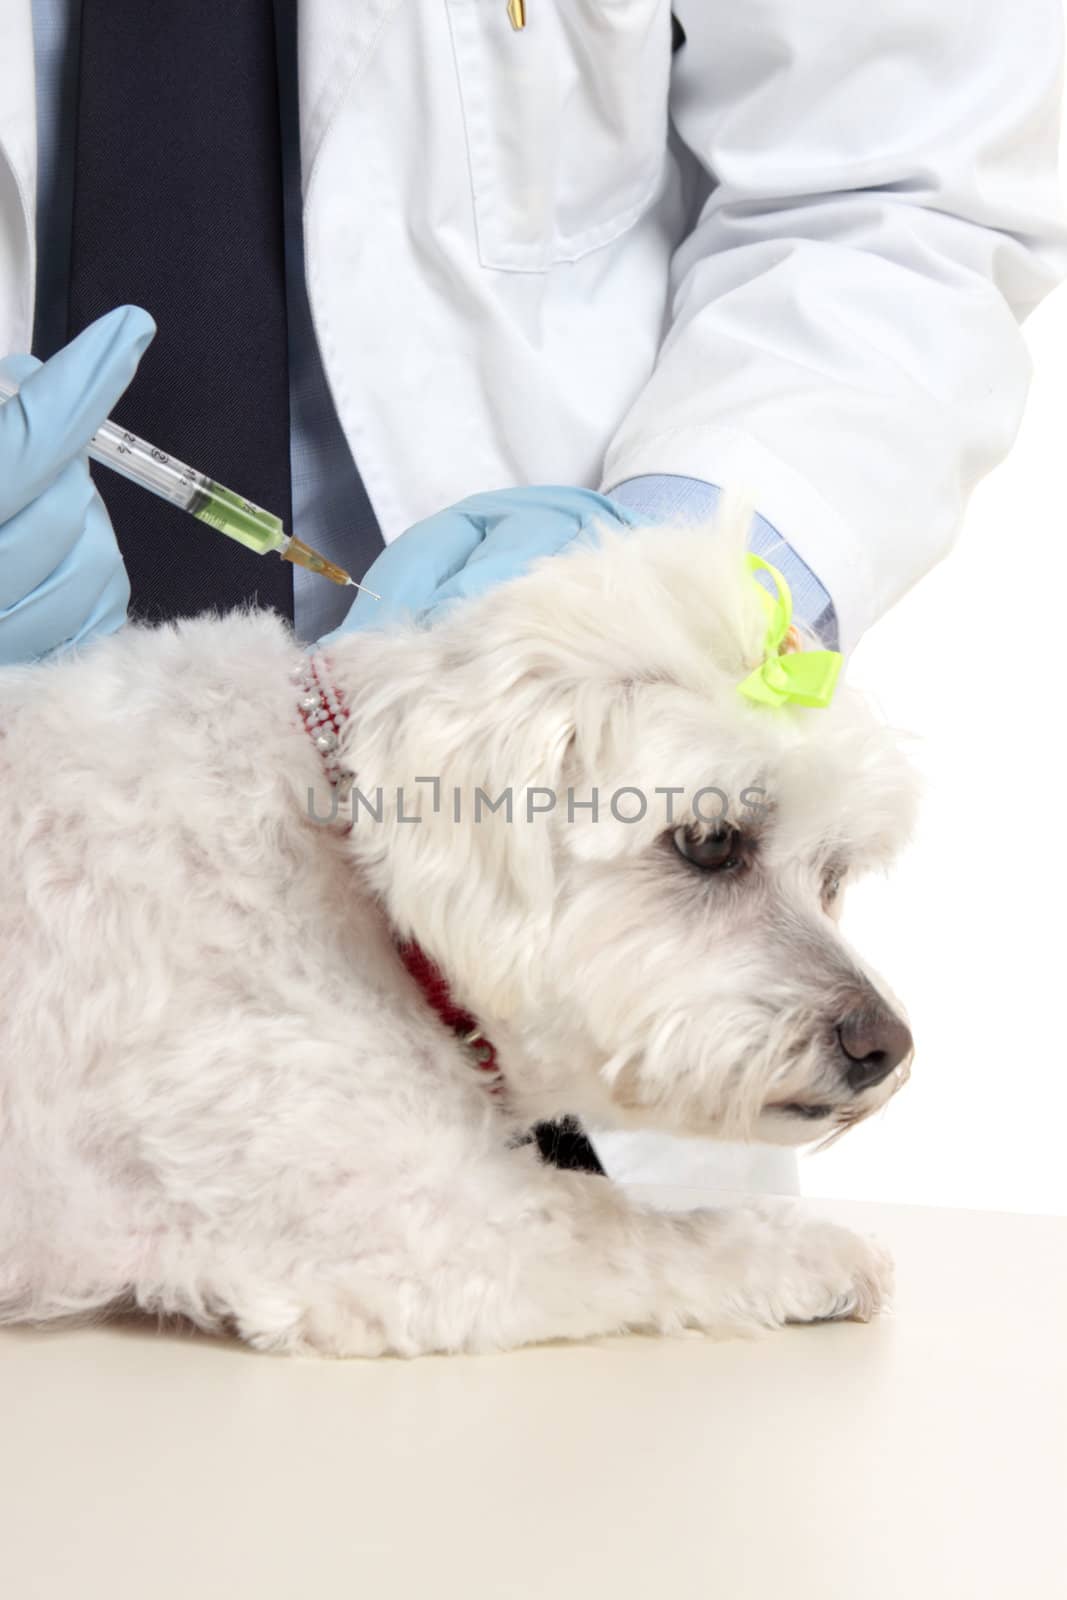 Veterinarian giving a maltese terrier a needle injection.  Focus to syringe.